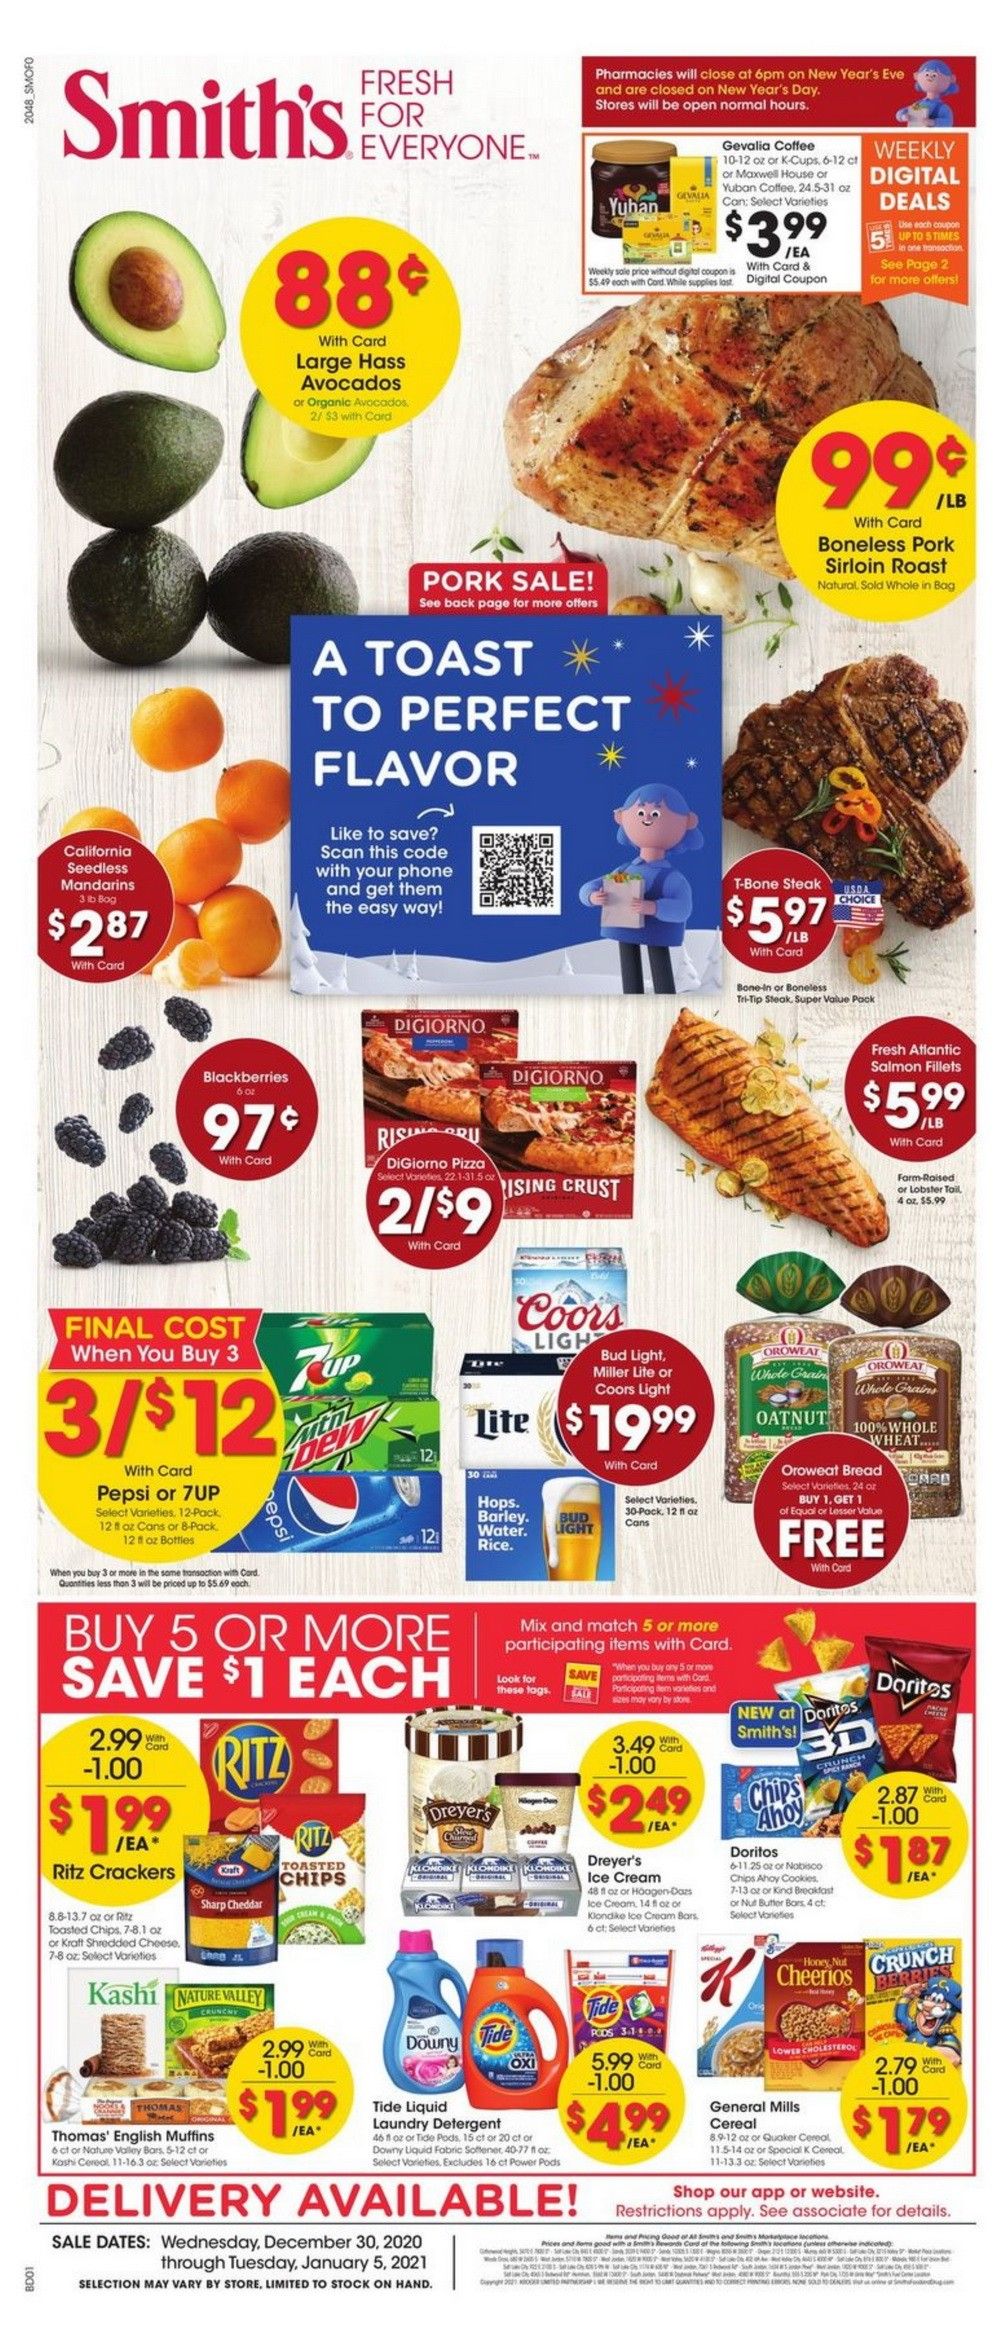 Smith's Food and Drug Weekly Ad Dec 30, 2020 - Jan 05, 2021